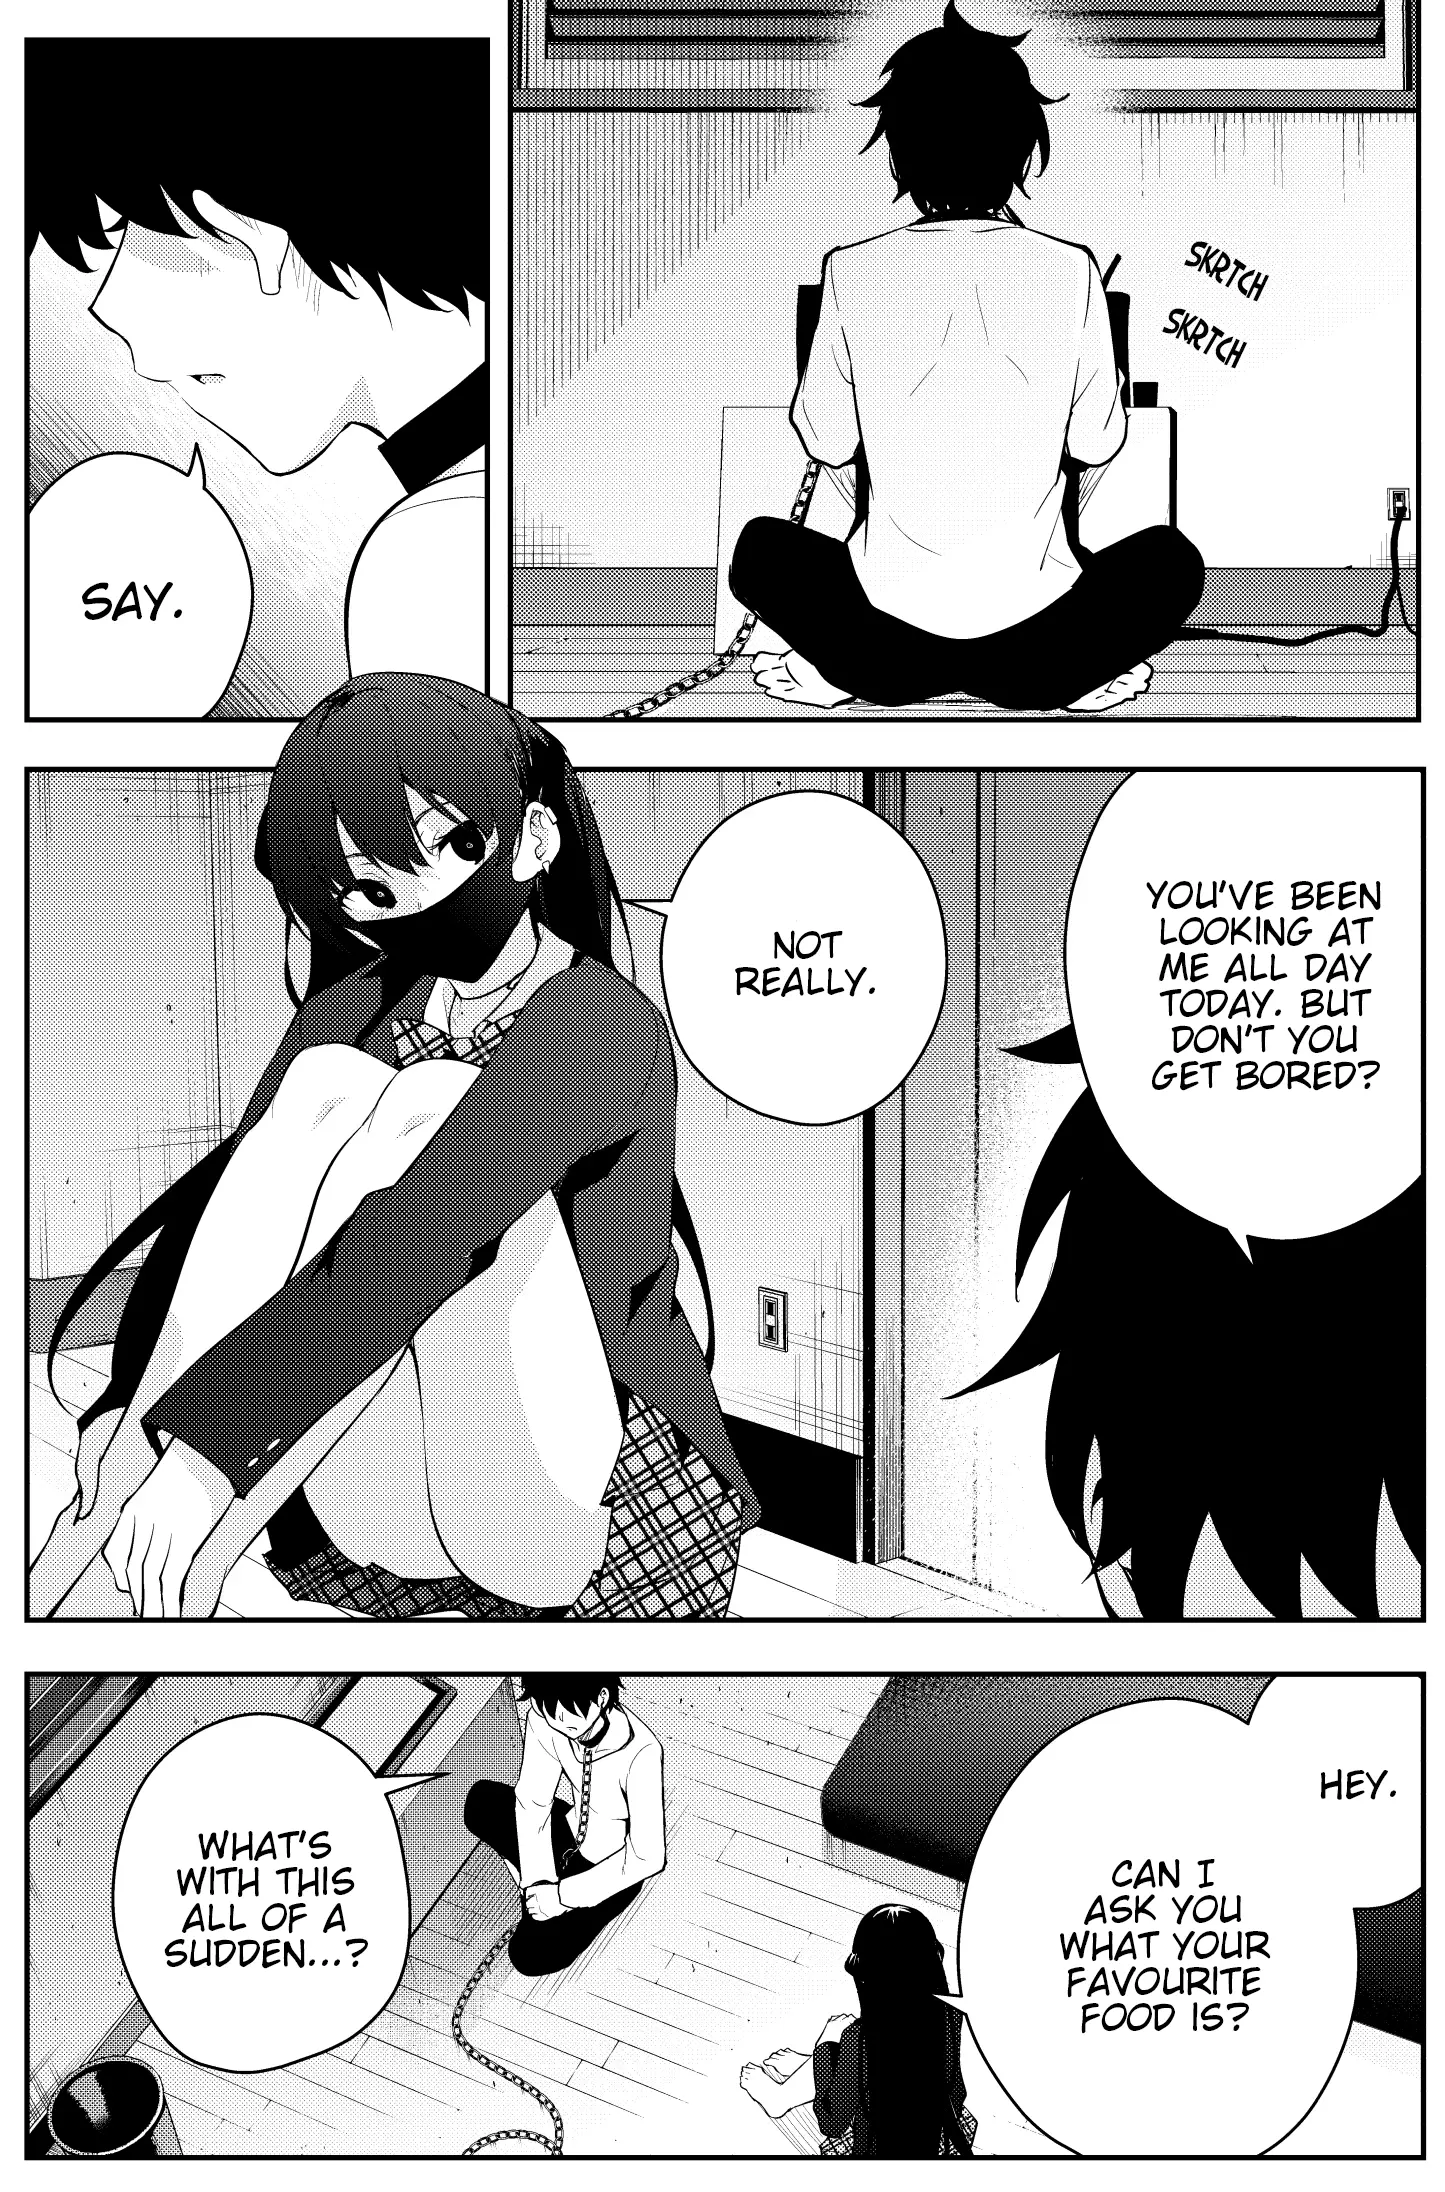 The Story Of A Manga Artist Confined By A Strange High School Girl - 21 page 1-c1f2e60c